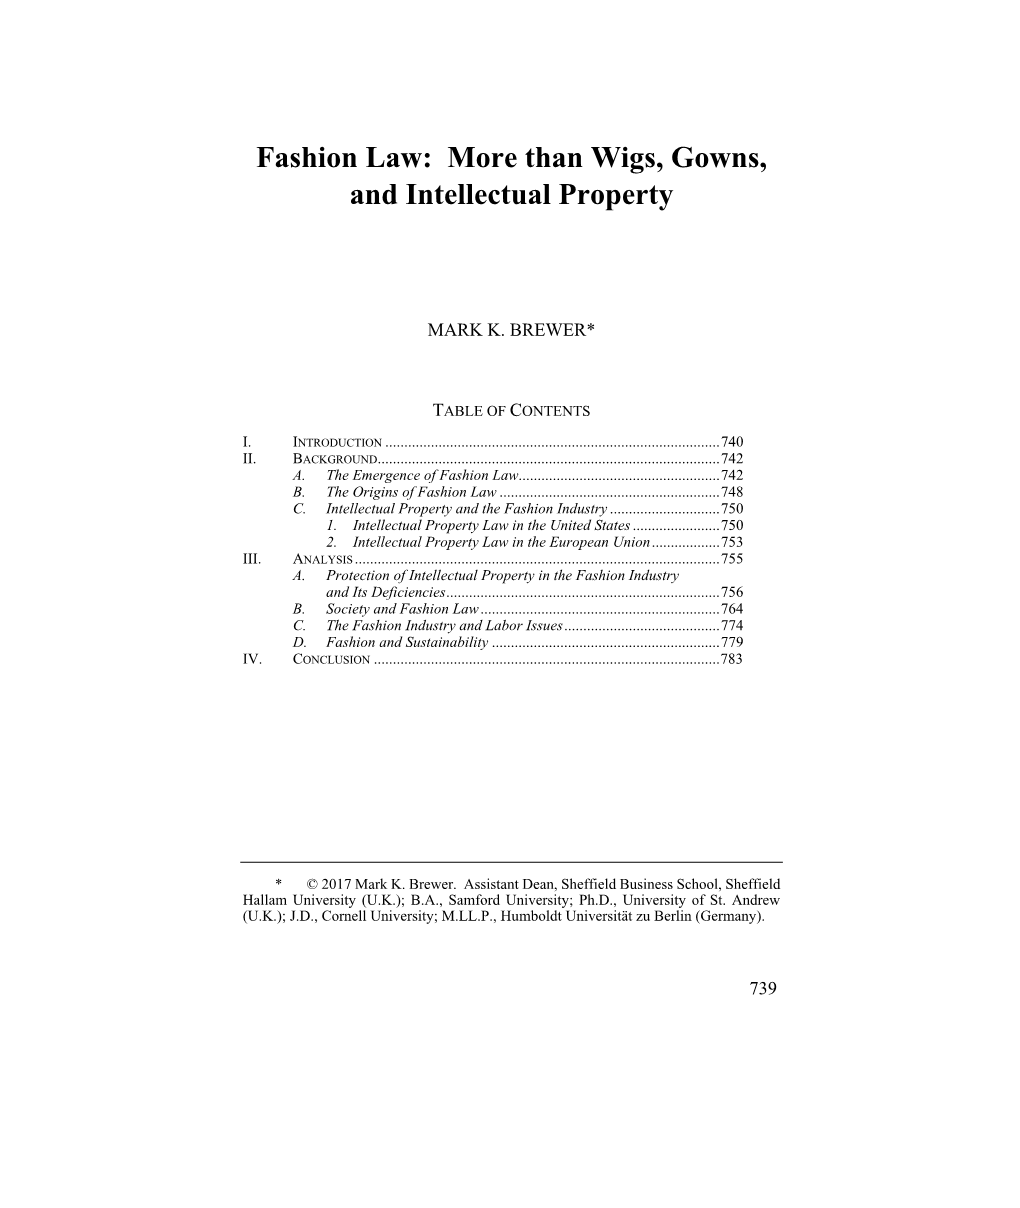 Fashion Law: More Than Wigs, Gowns, and Intellectual Property